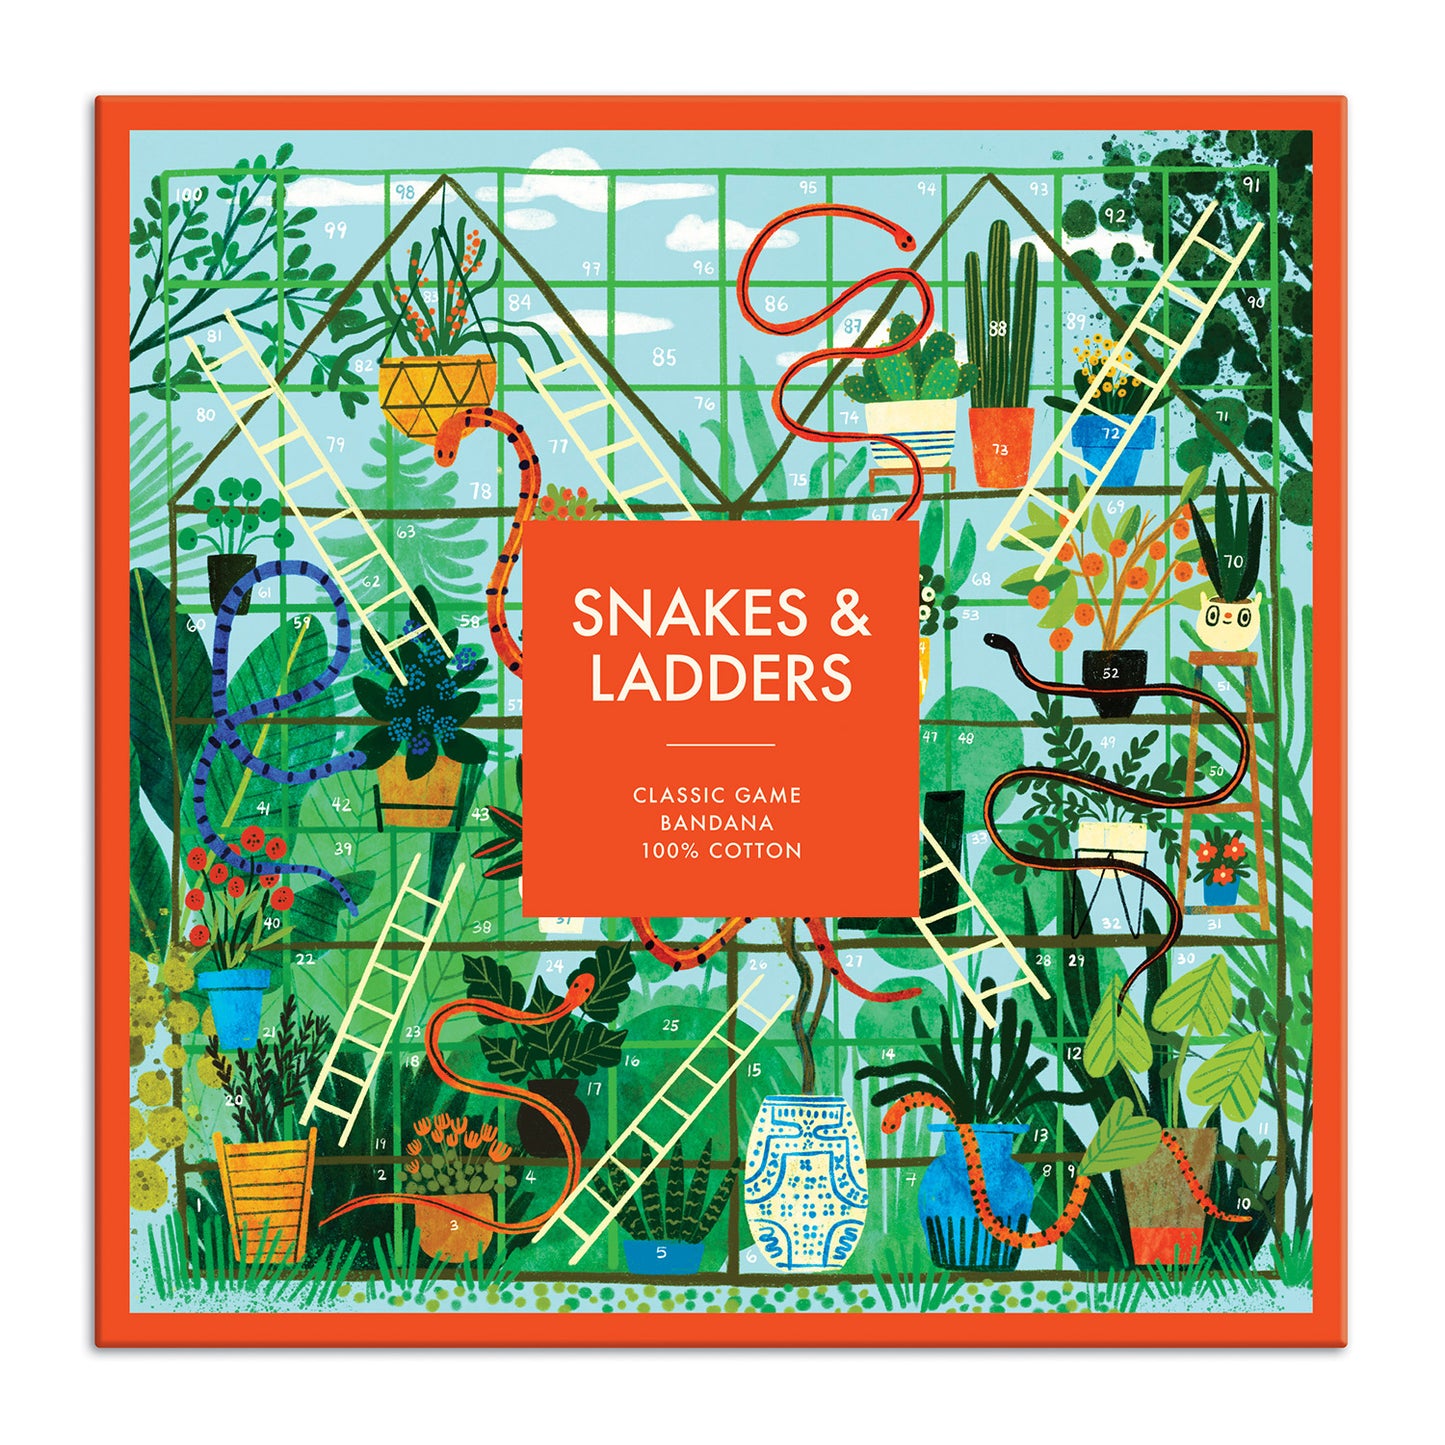 Snakes and Ladders Classic Game Bandana